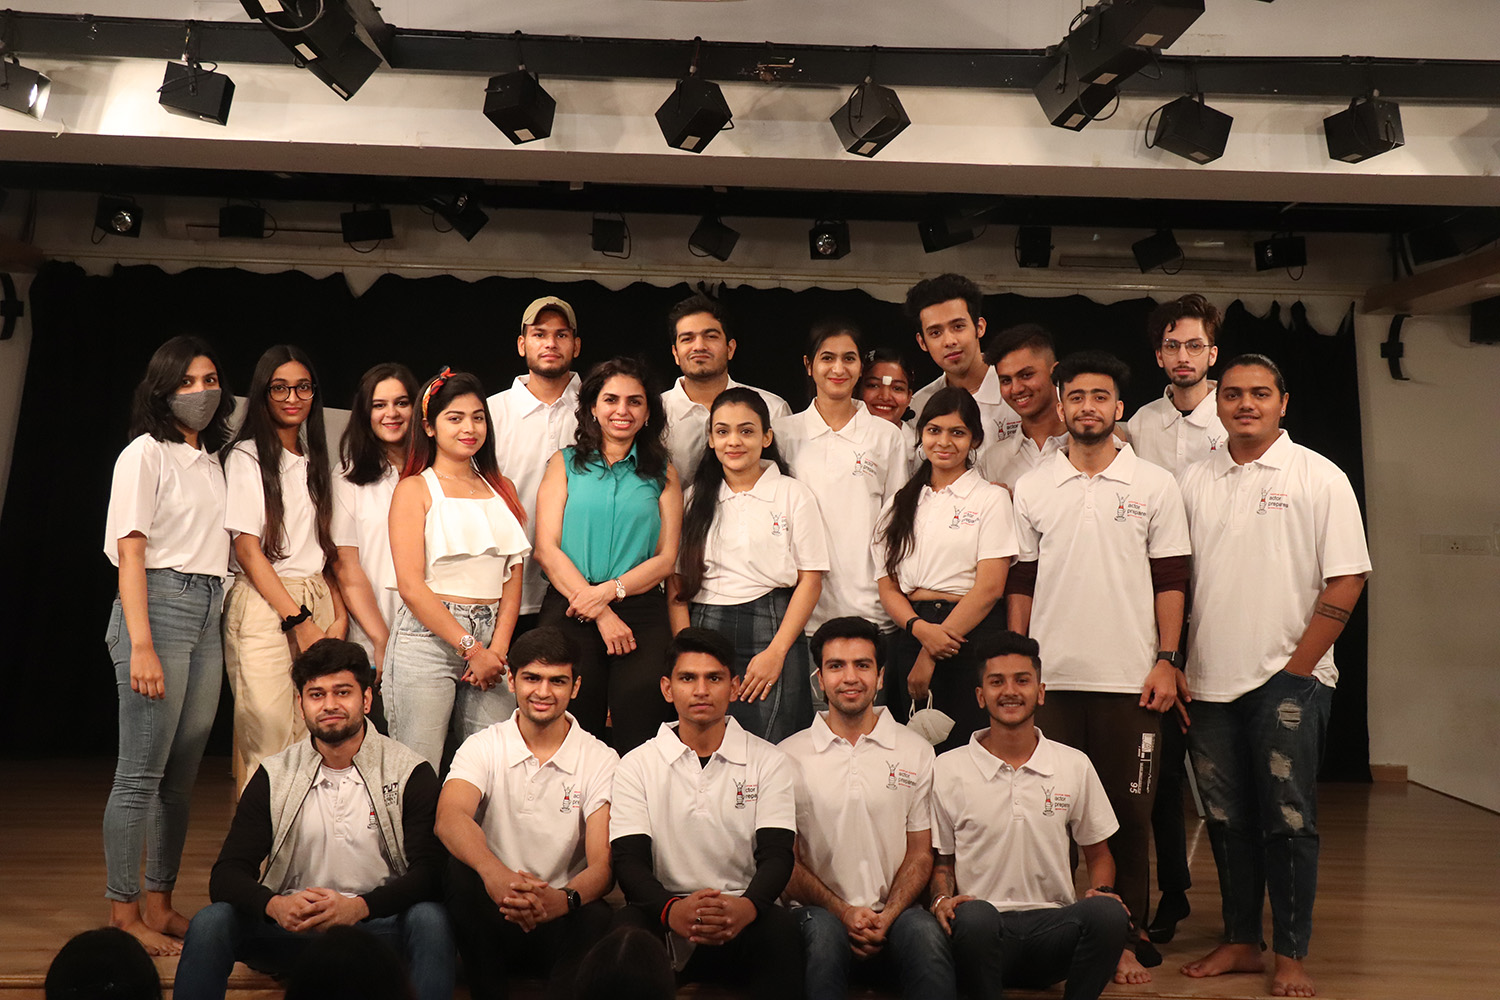 GUEST LECTURE WITH CELEBRITY FITNESS TRAINER DEEPA TANNA